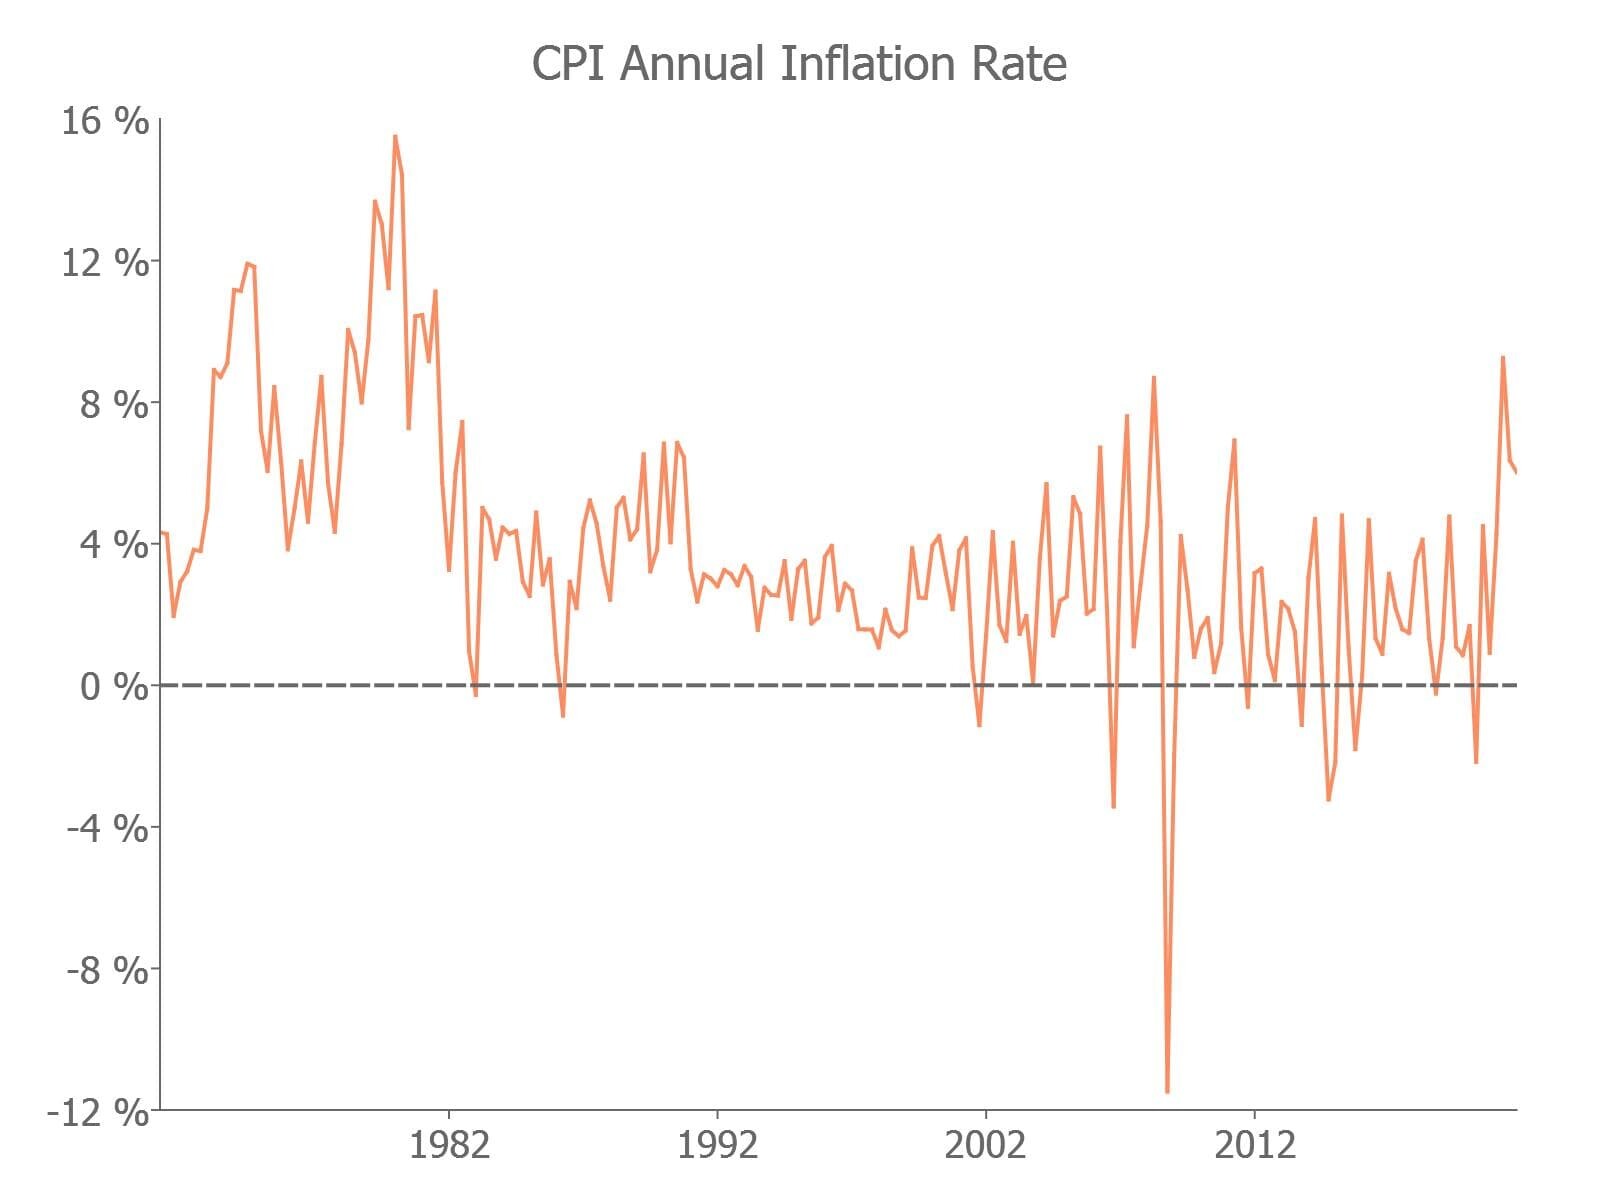 Plot of CPI annual inflation rate. 